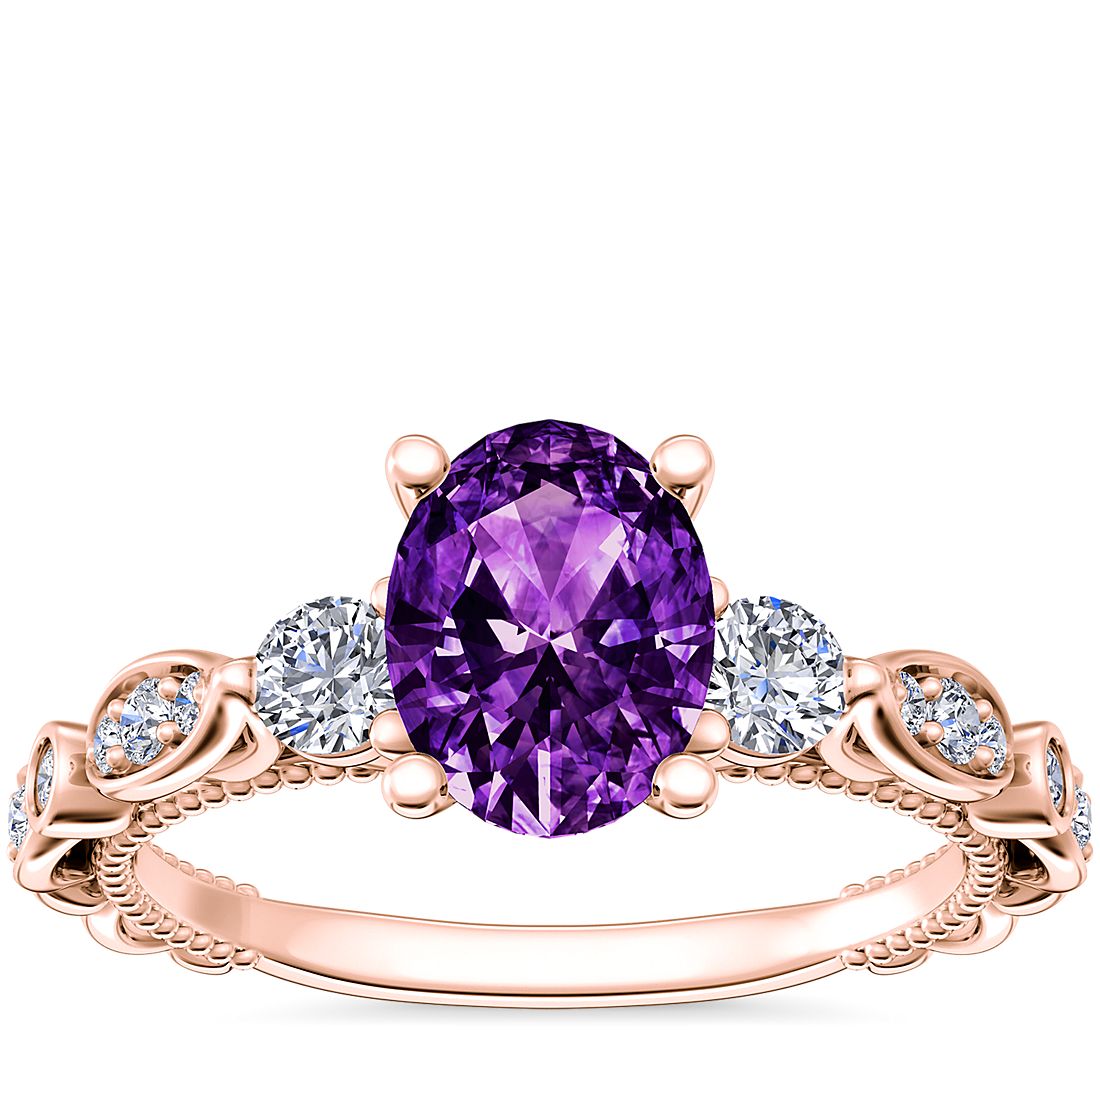 Floral Ellipse Diamond Cathedral Engagement Ring with Oval Amethyst in 14k Rose Gold (8x6mm)